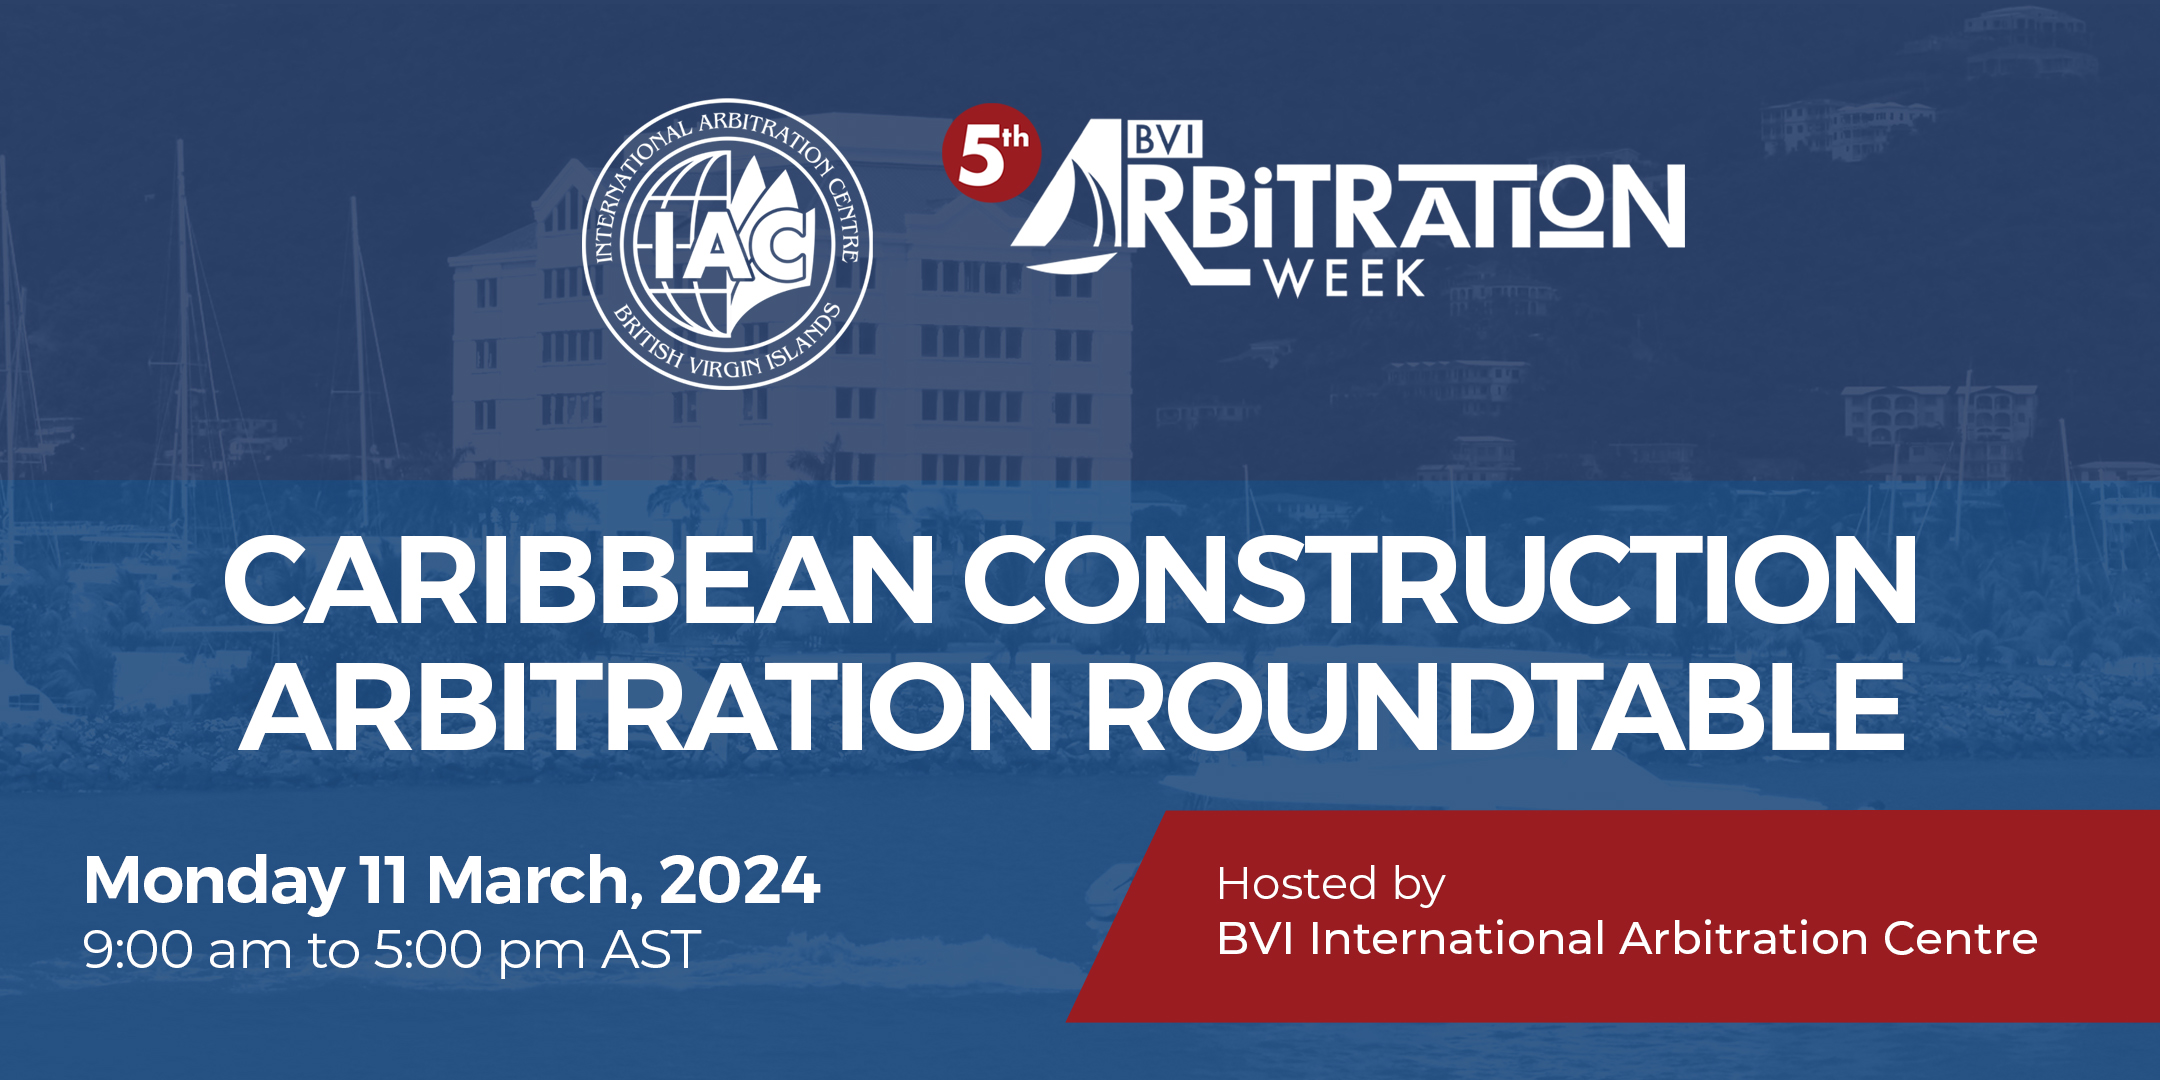  Exclusive Caribbean Construction Arbitration Roundtable to be held during BVI Arbitration Week 2024